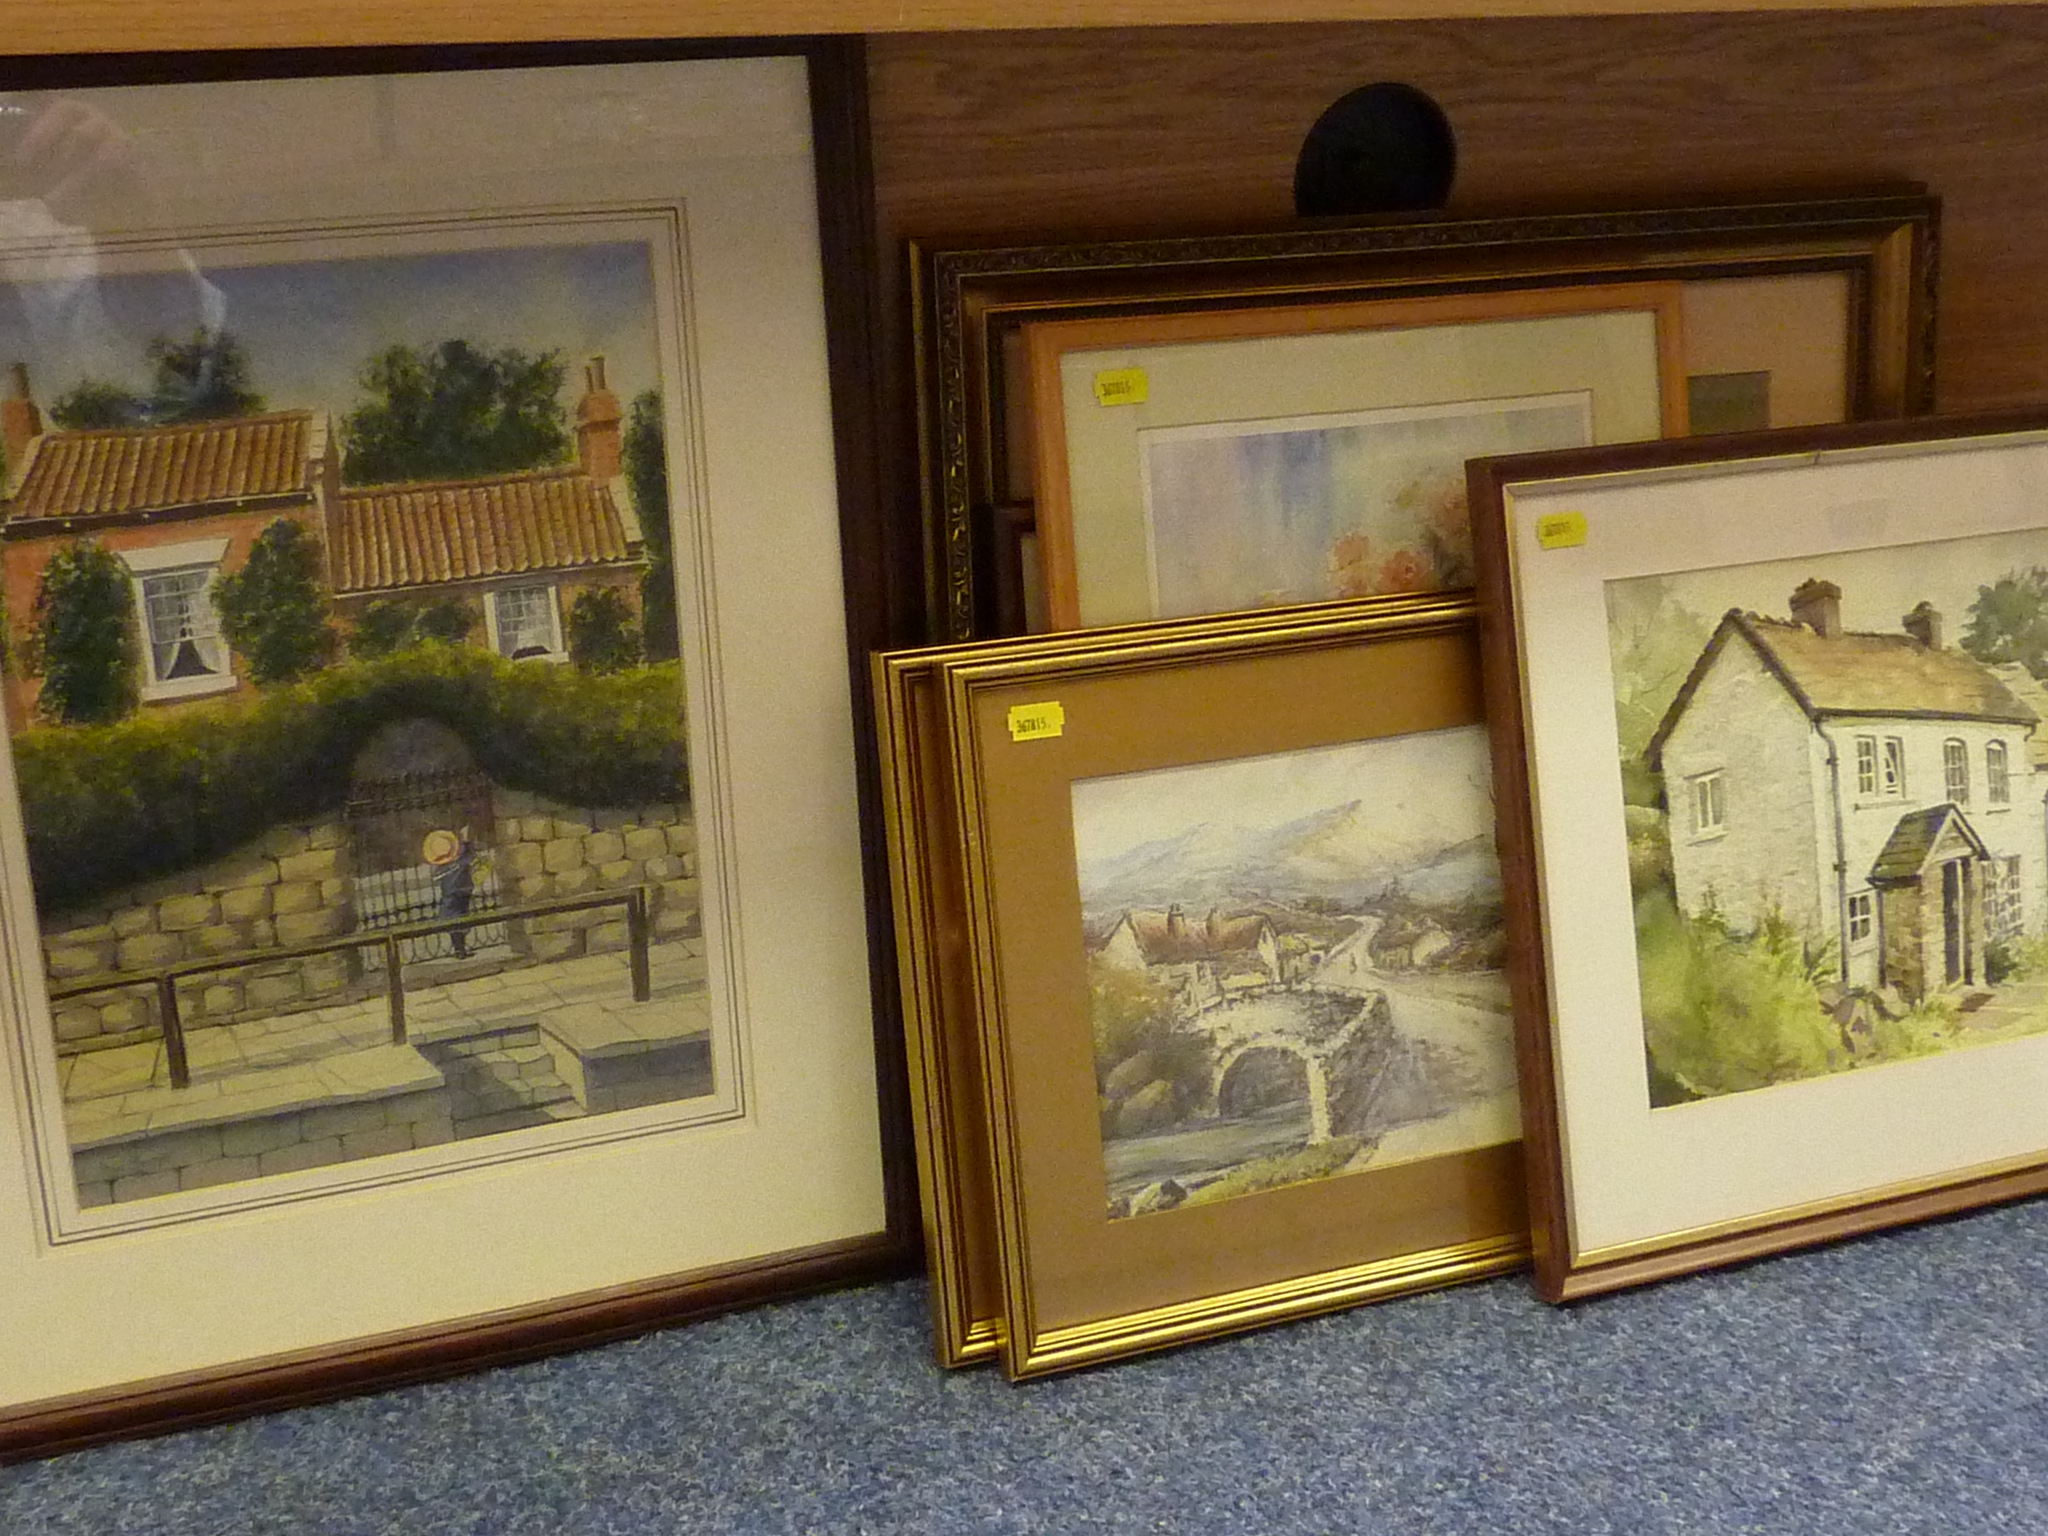 Cottage scenes, two watercolours by D M Broomhead and May Marriot,